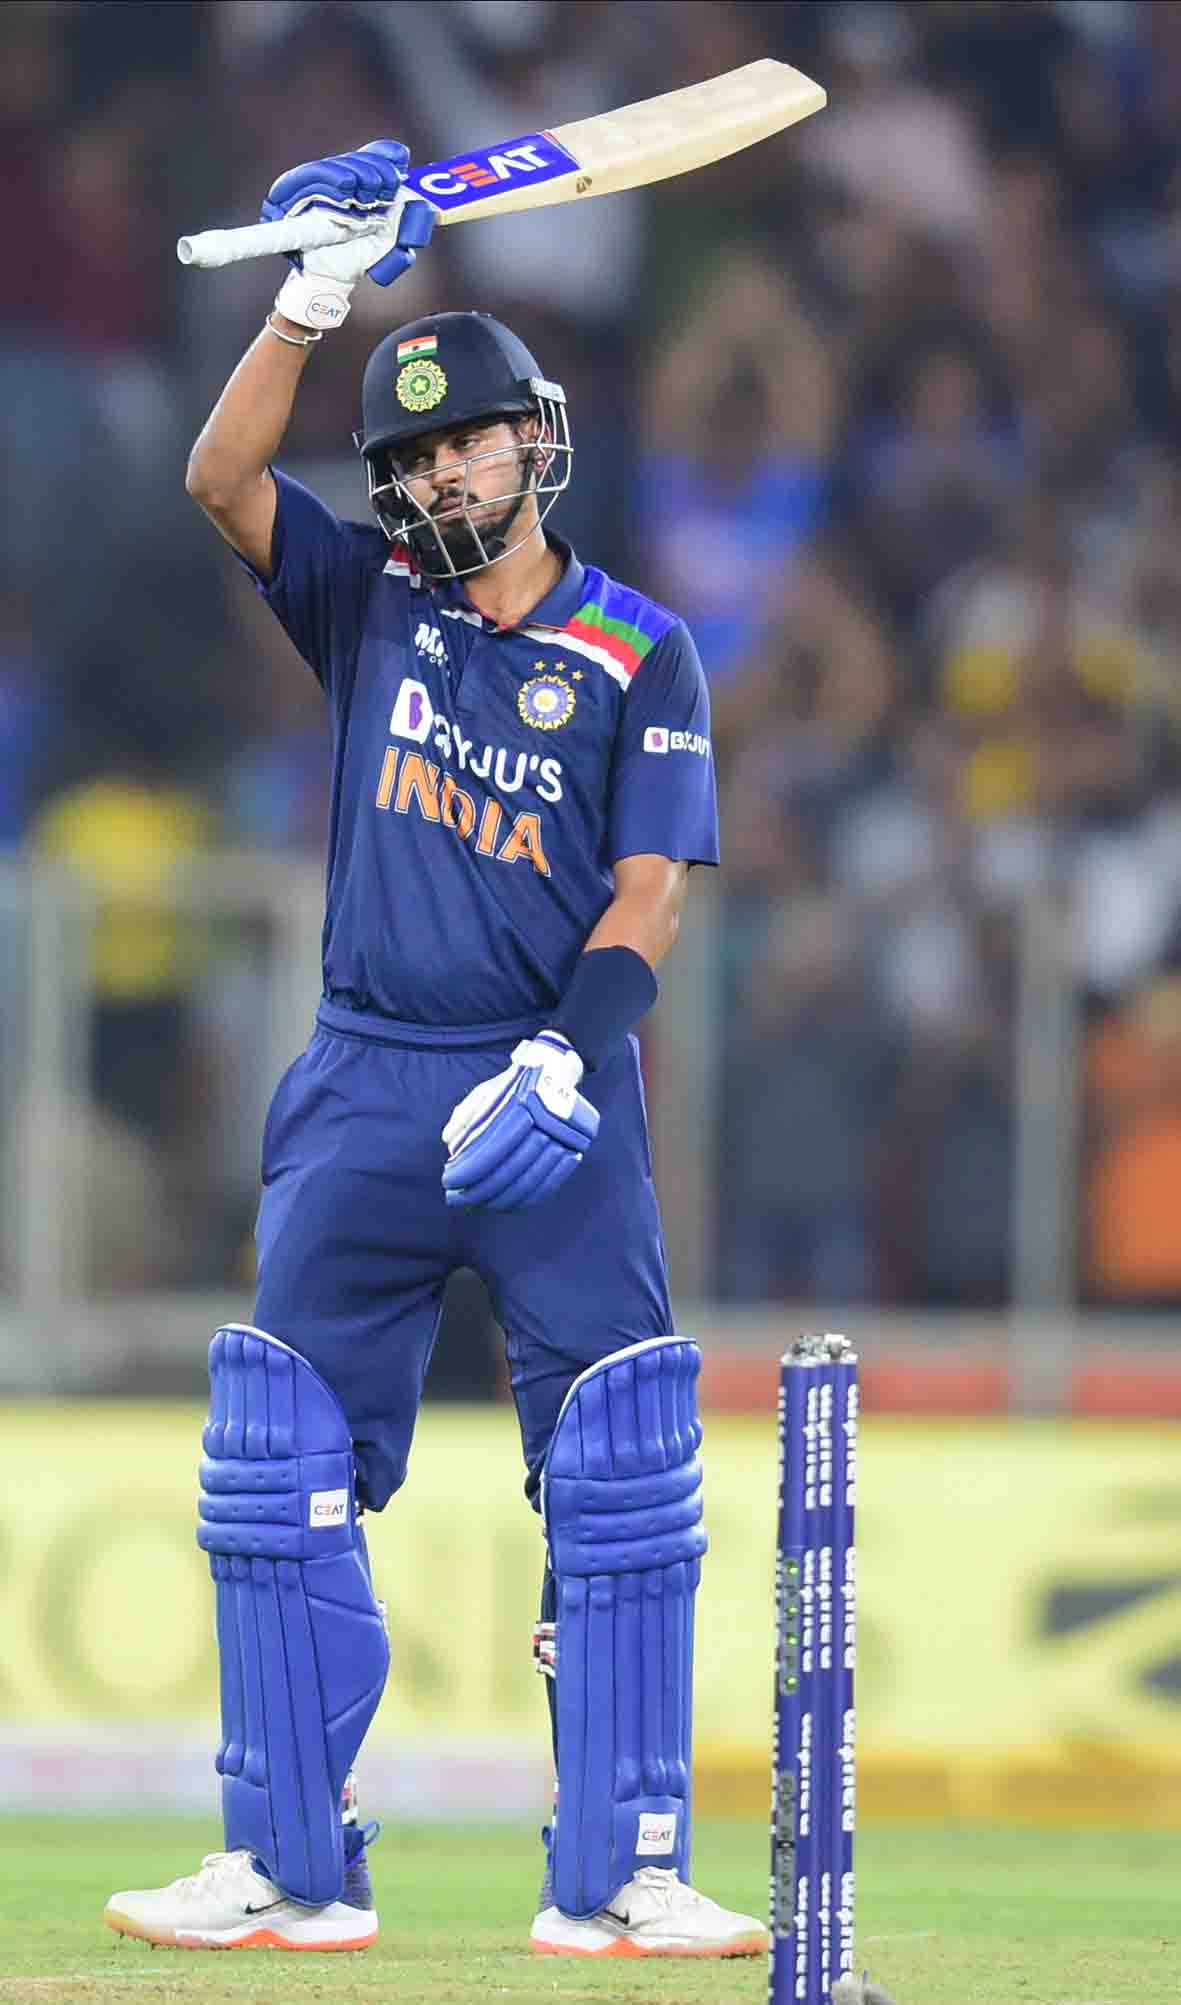 Shreyas Iyer bats well but India struggle to 124/7 in opening T20I against England